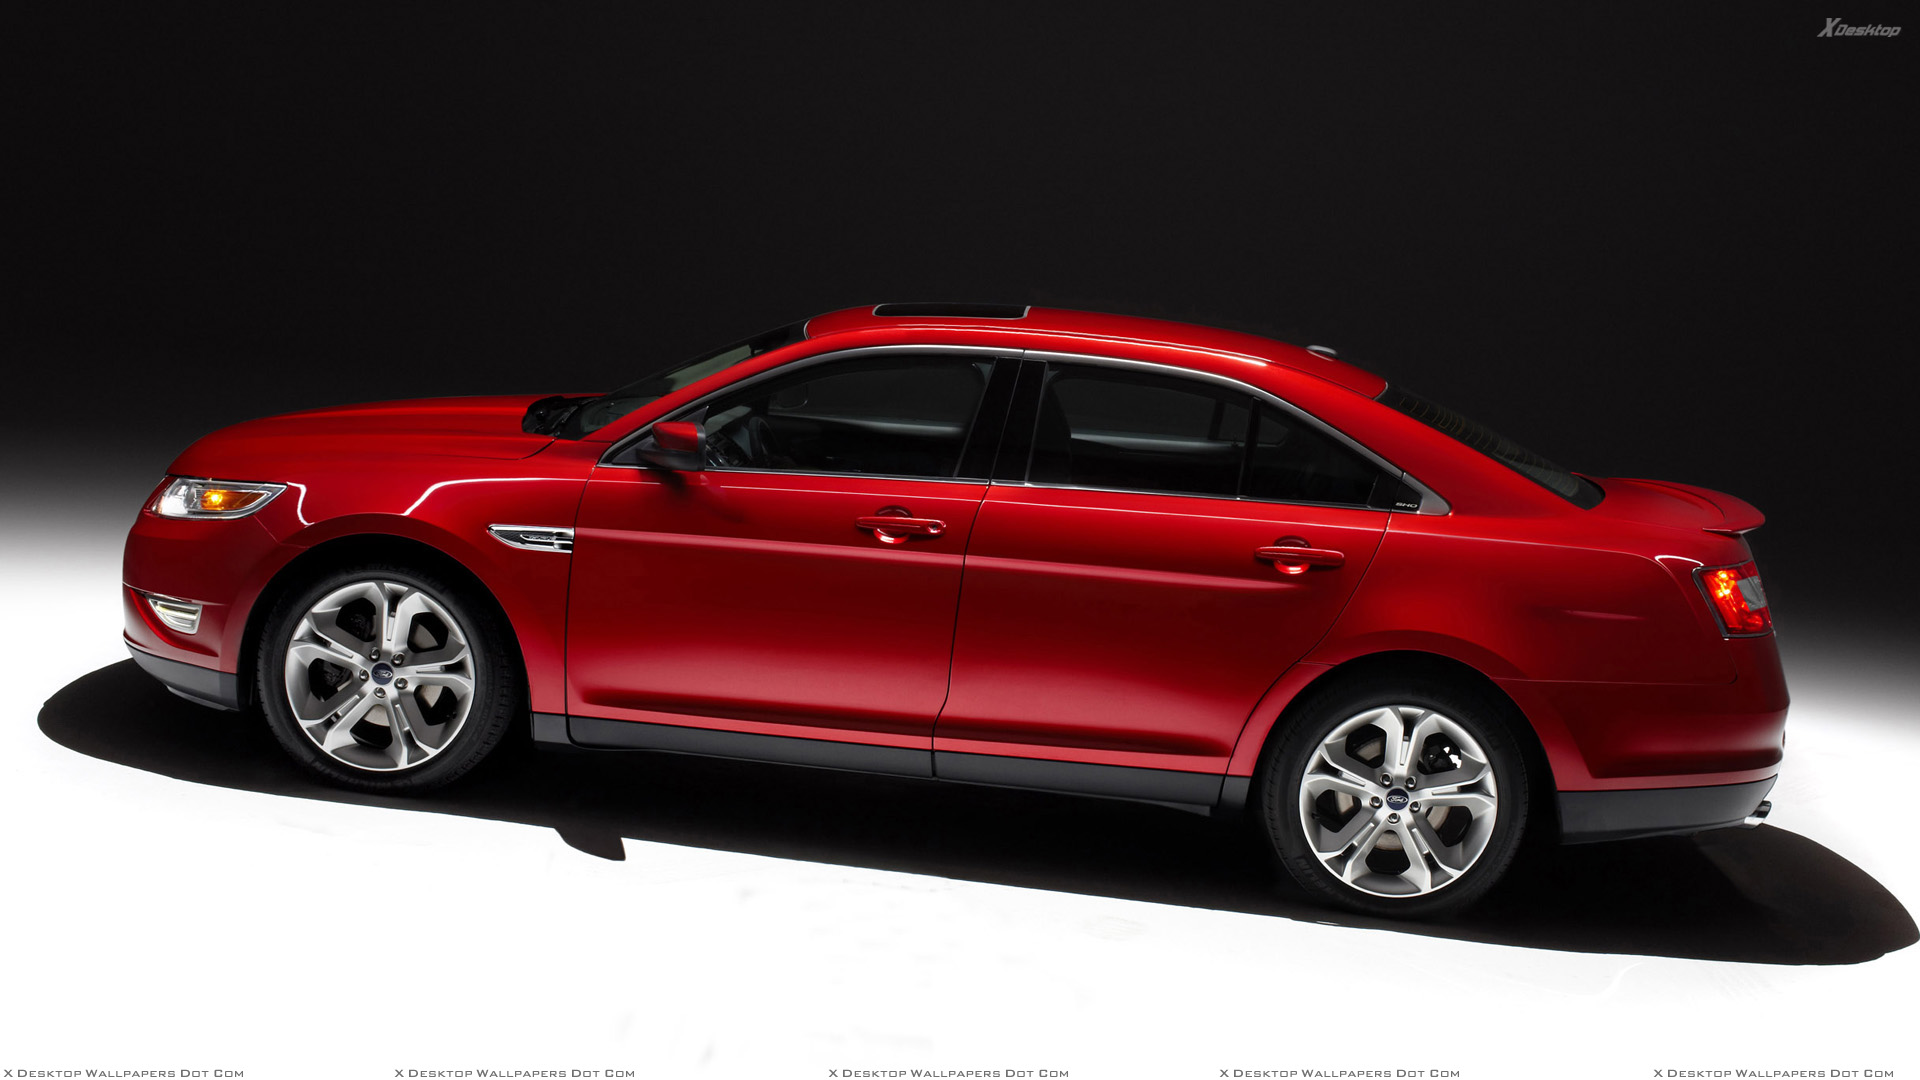 Ford Taurus SHO Wallpapers Photos Images in HD